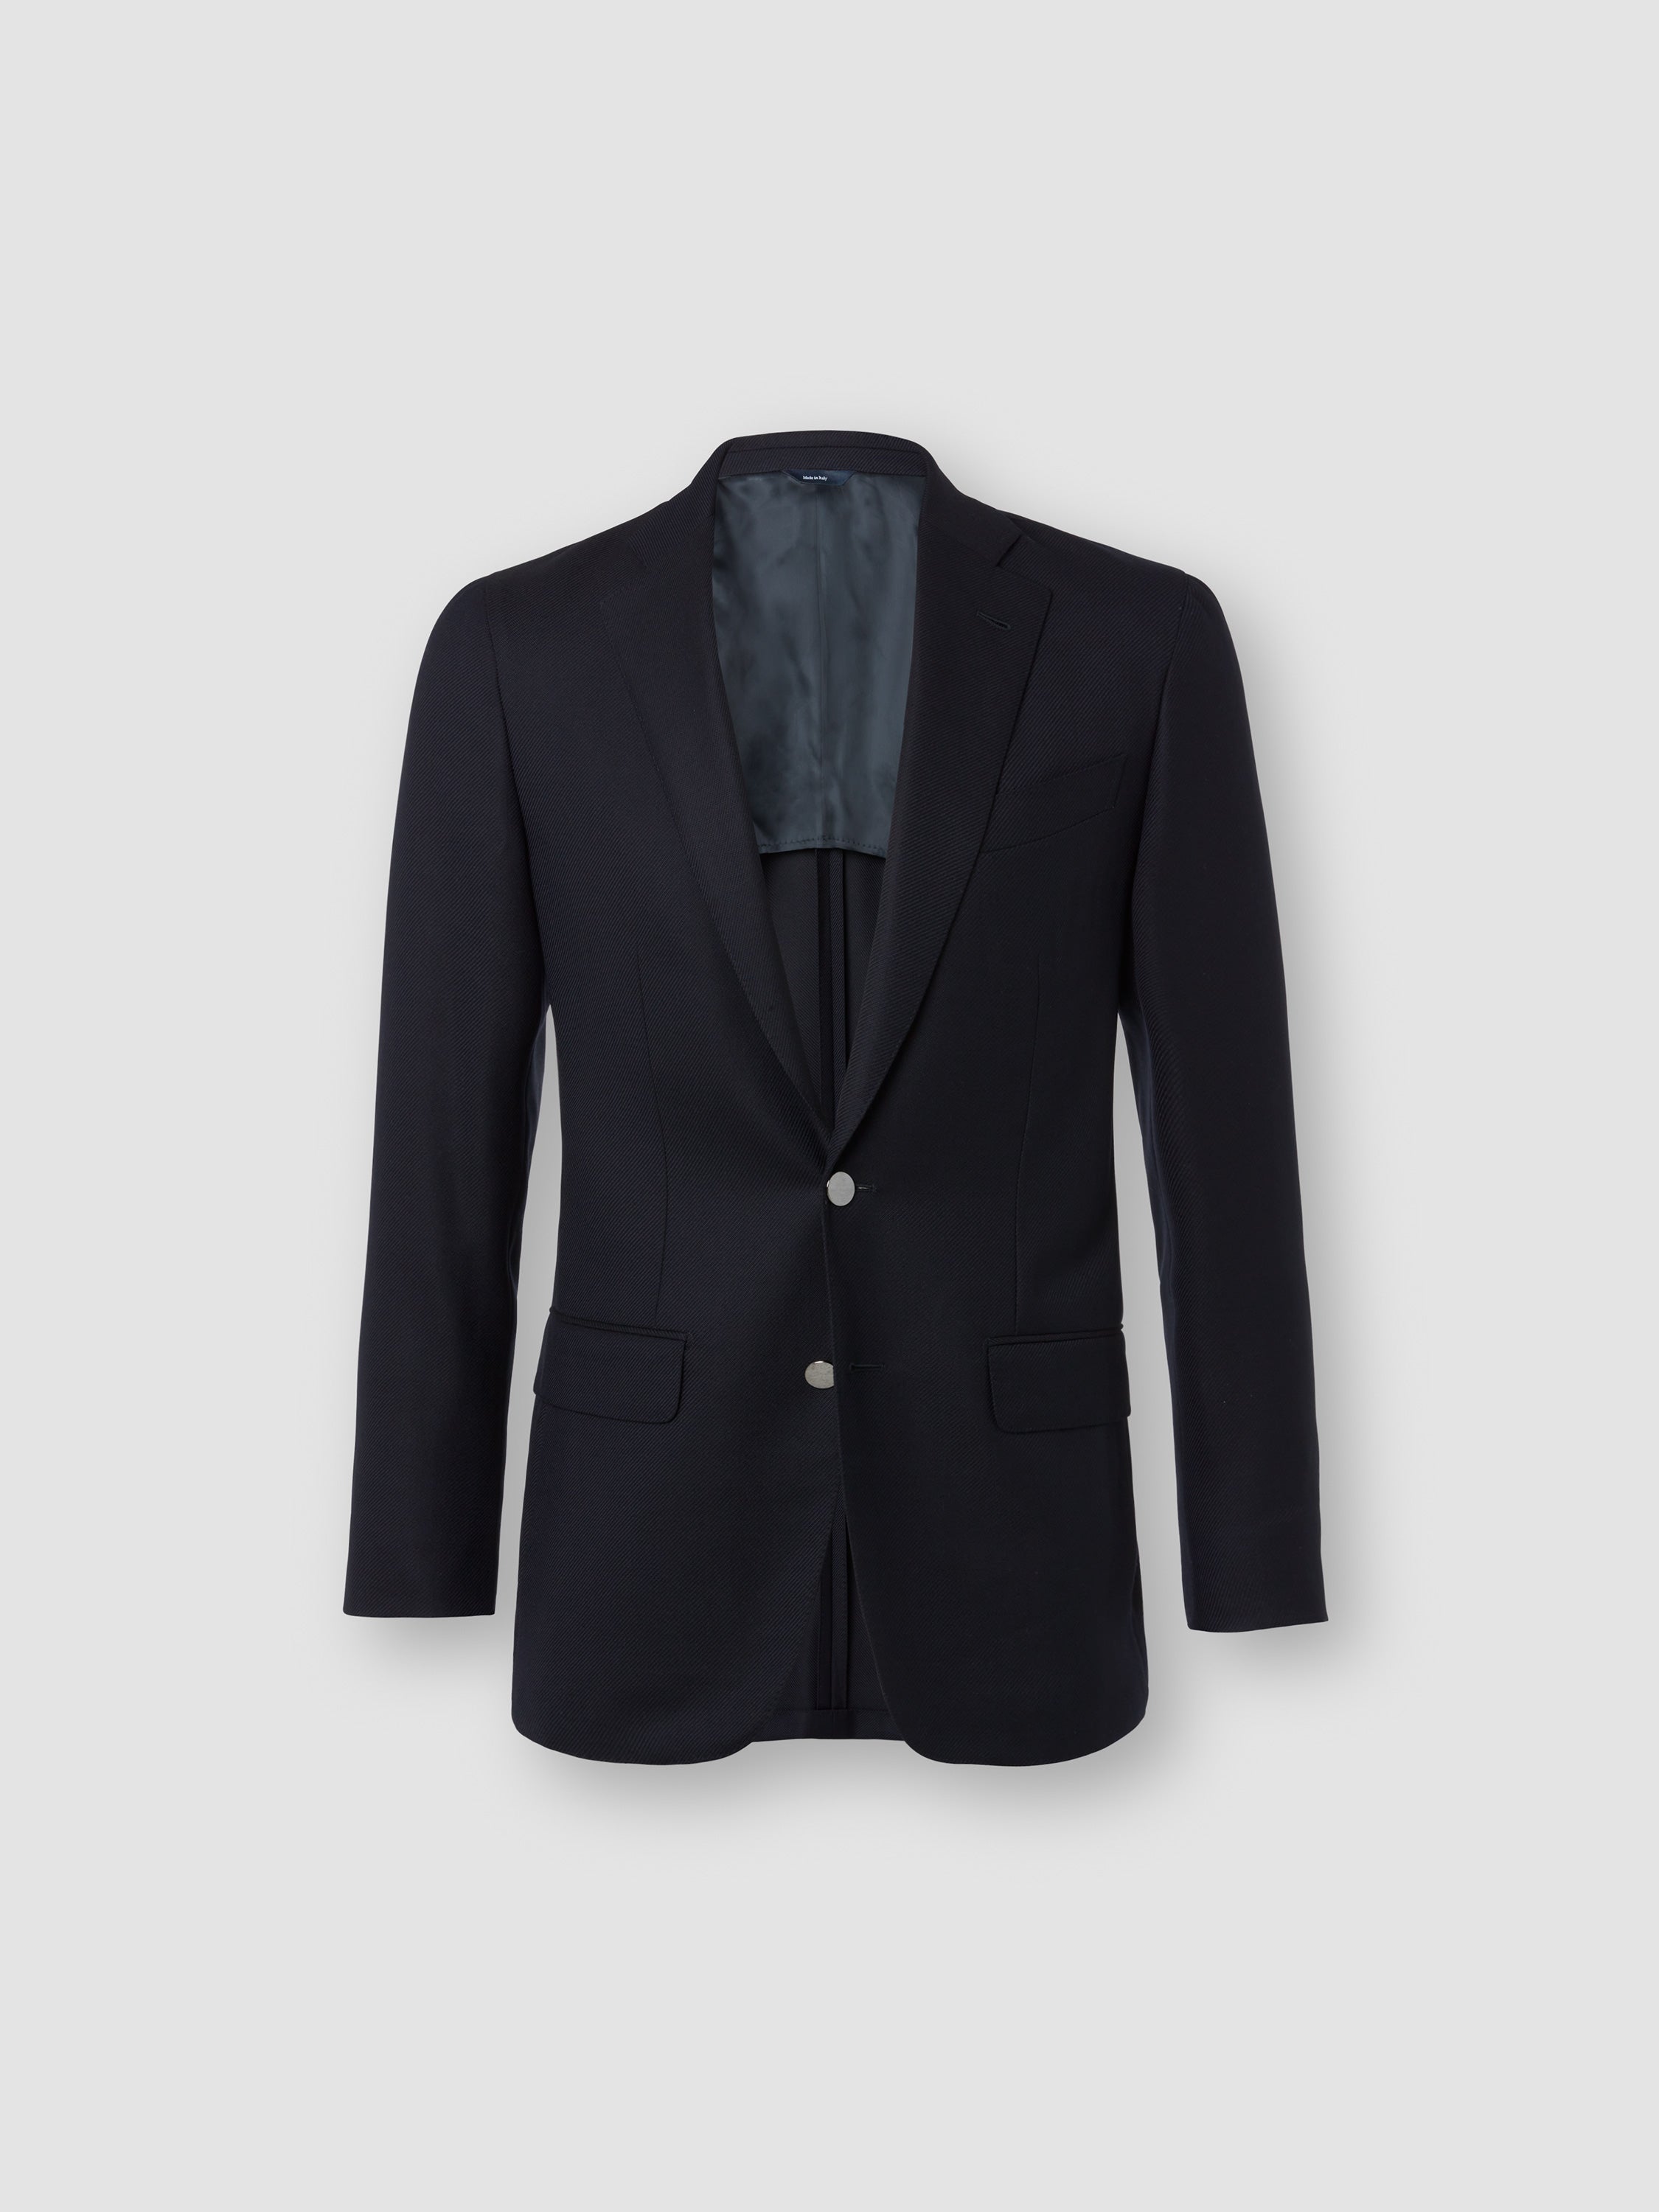 Wool Unstructured Single Breasted Jacket Navy Product Image